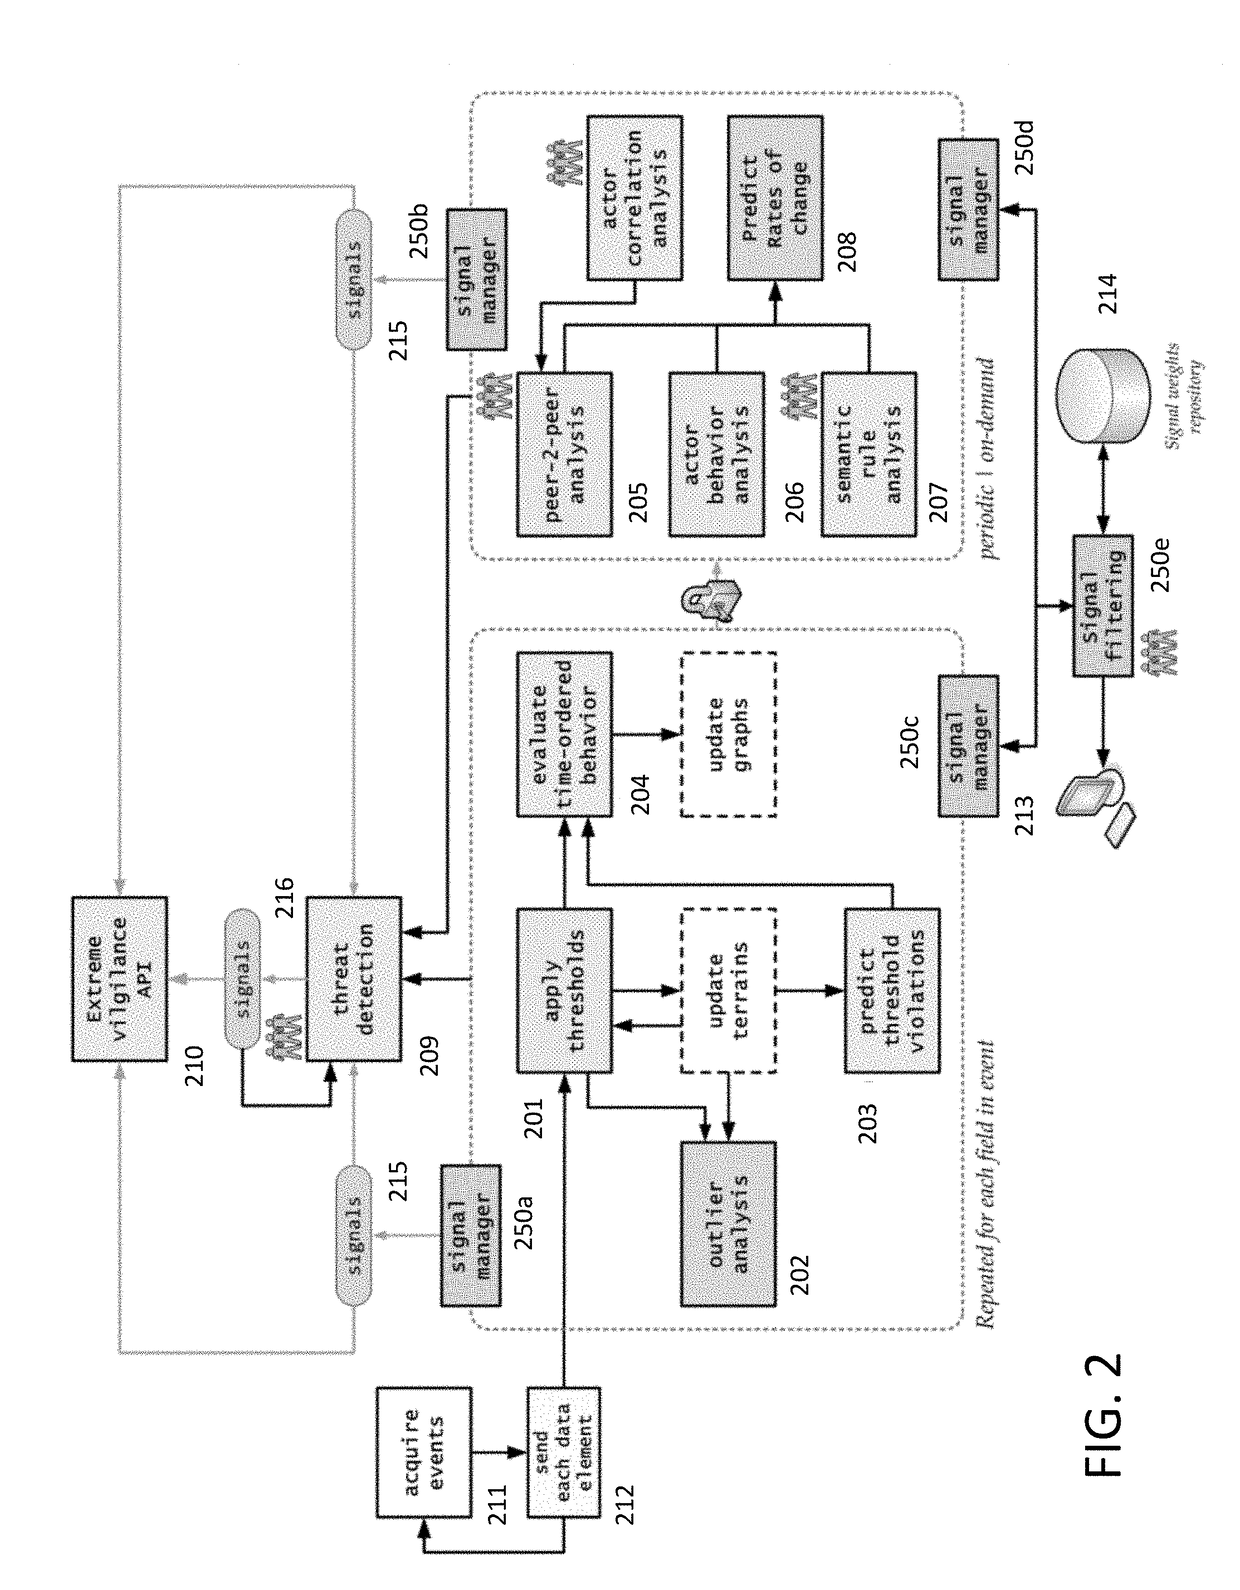 Cognitive modeling apparatus for detecting and adjusting qualitative contexts across multiple dimensions for multiple actors